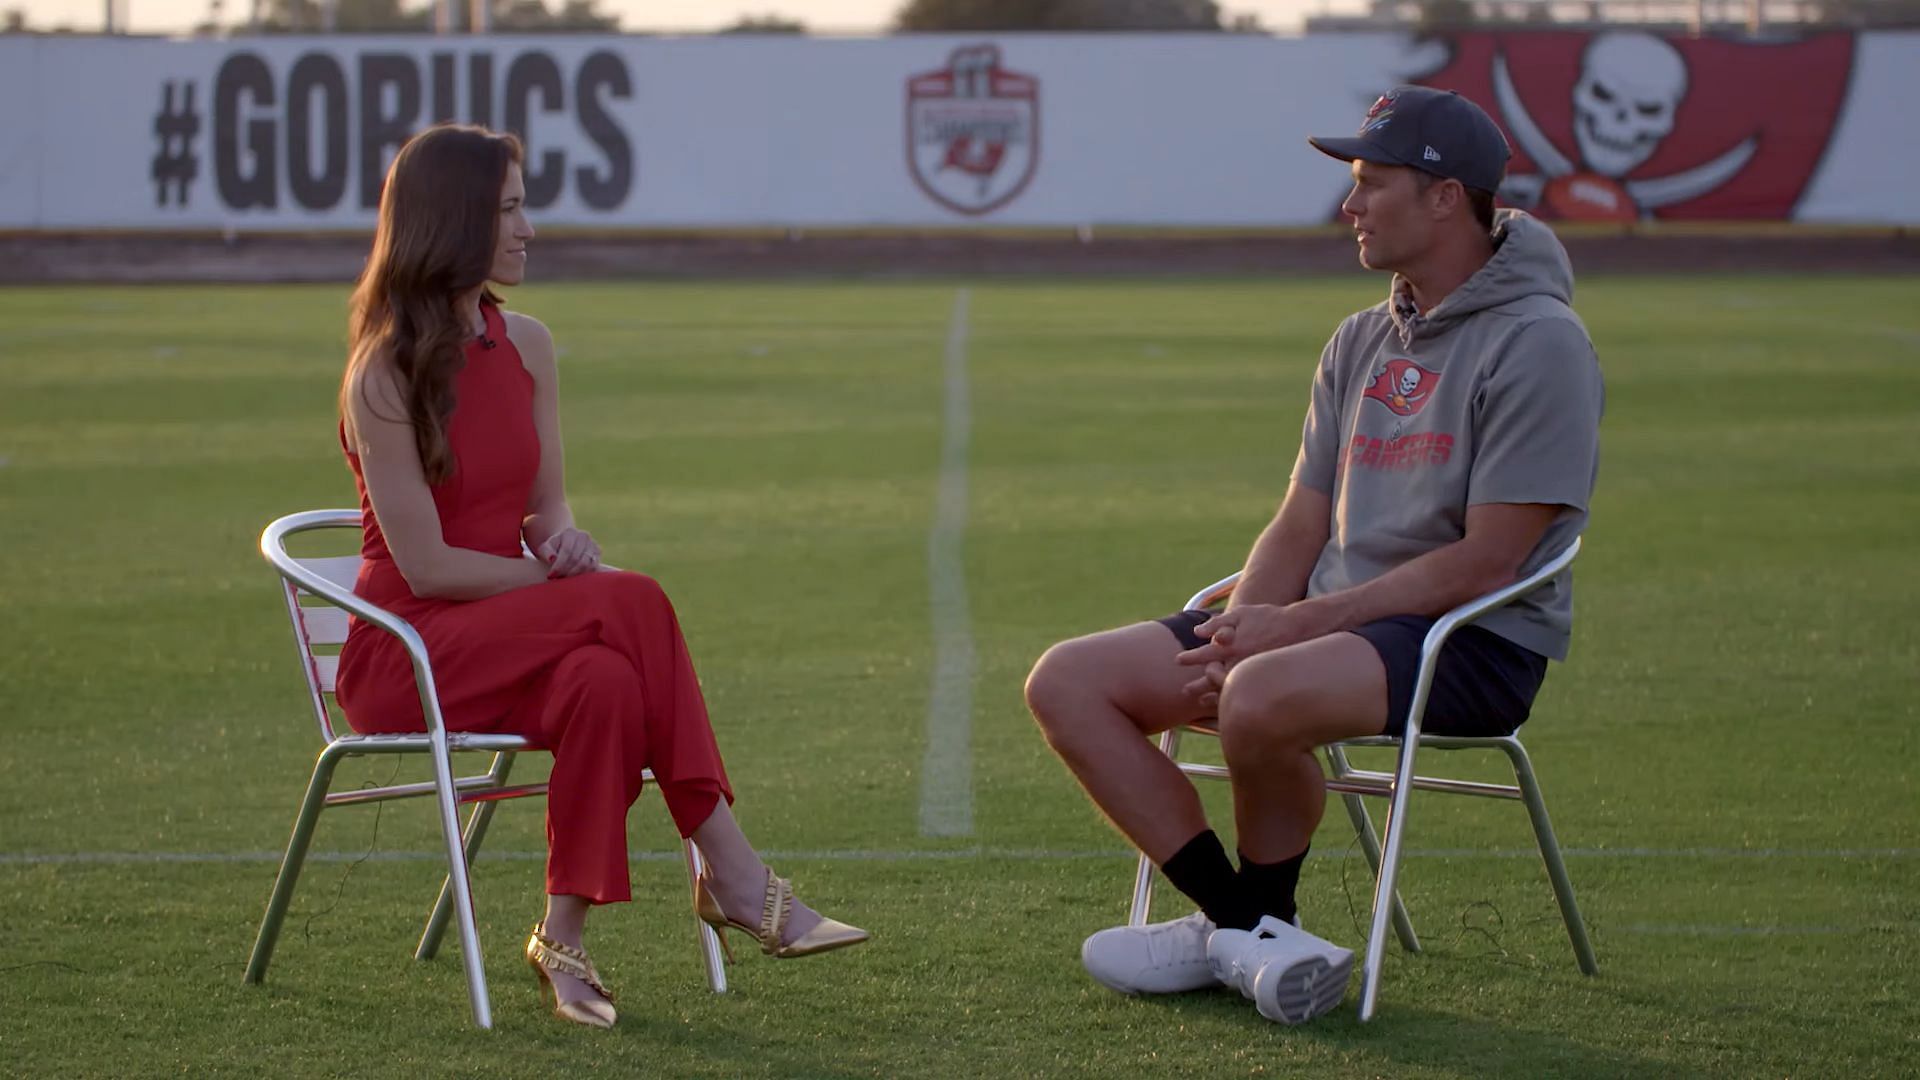 Brady talking with Casey Phillips. Photo via Tamp Bay Buccaneers Youtube.